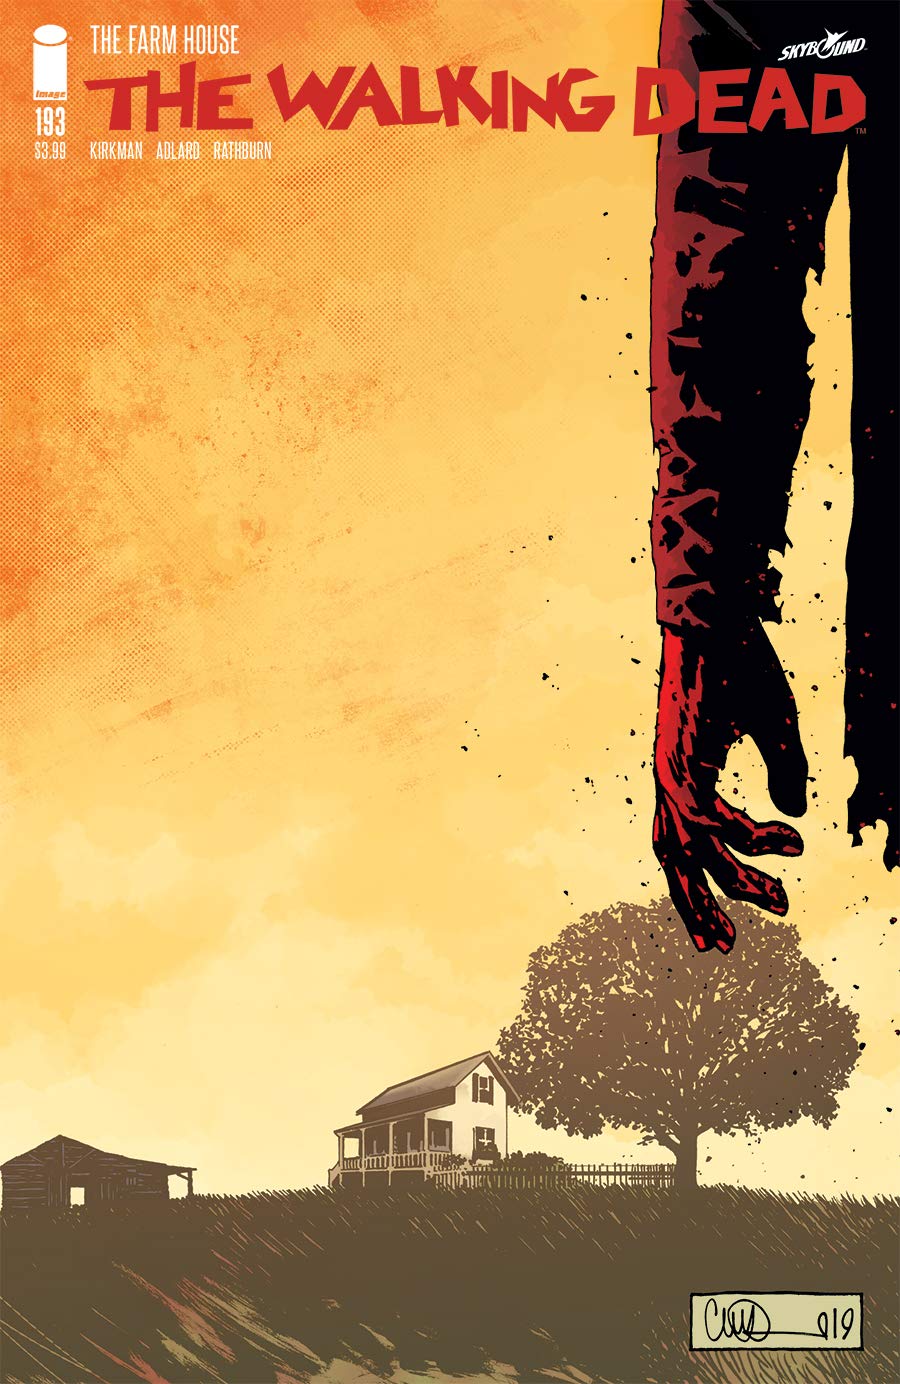 The 100 Best Comics of the Decade: The Walking Dead #193